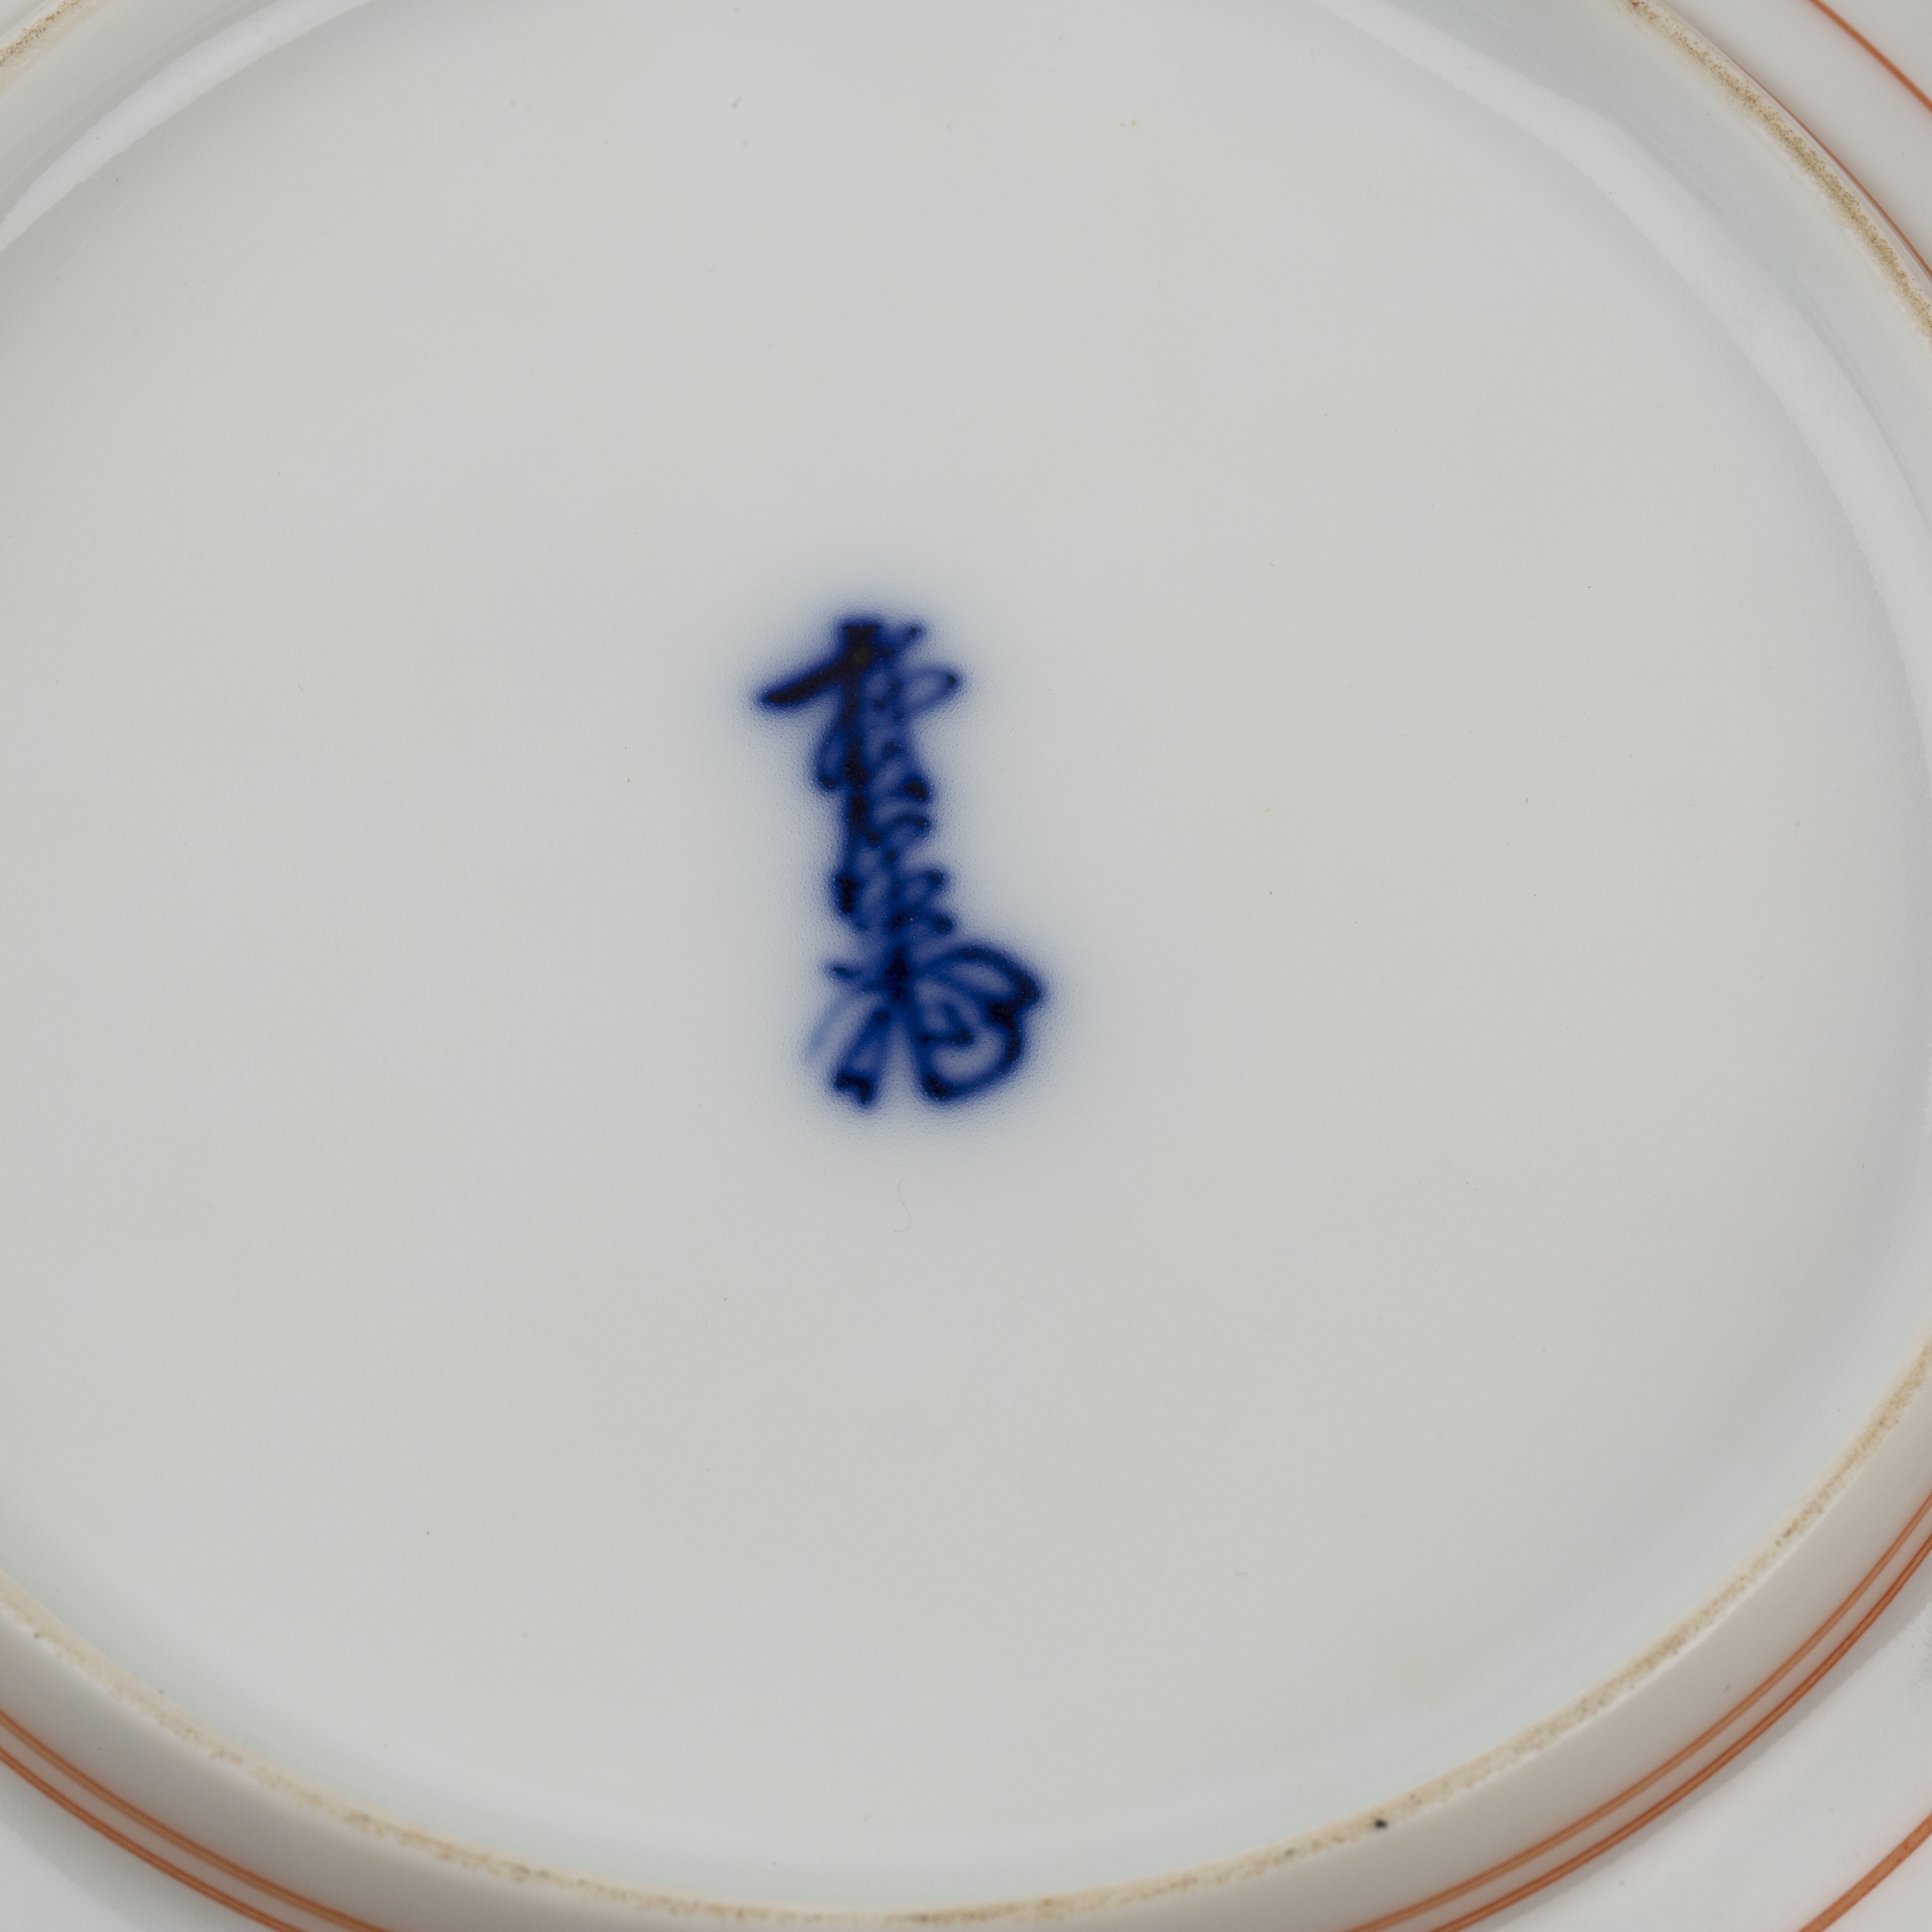 Kakiemon saucer dish Japanese in a collectors case, red seal to the interior lid of the case, the - Image 2 of 3